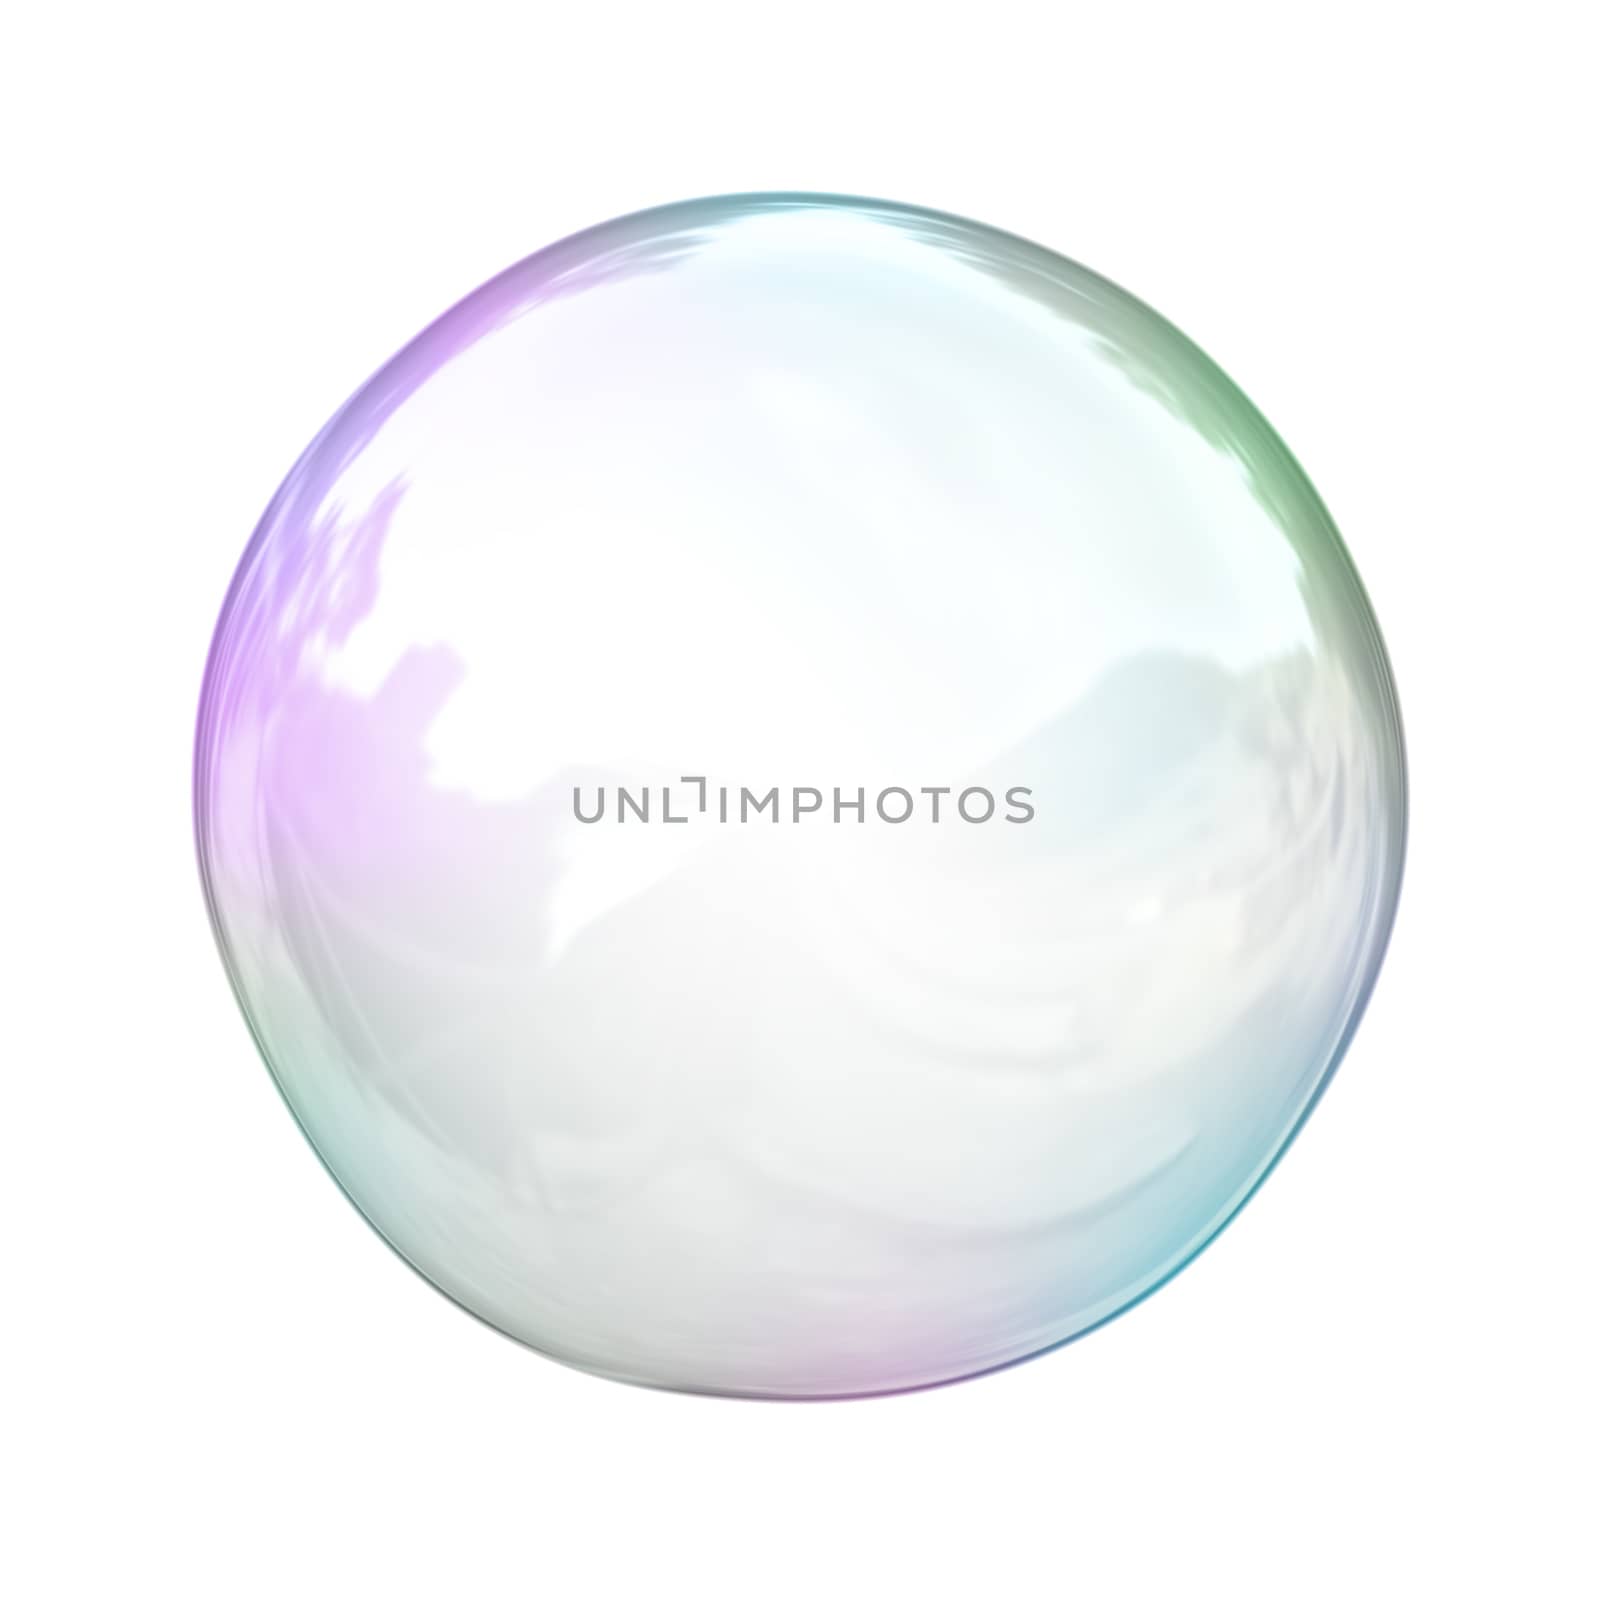 An image of a soap bubble background illustration